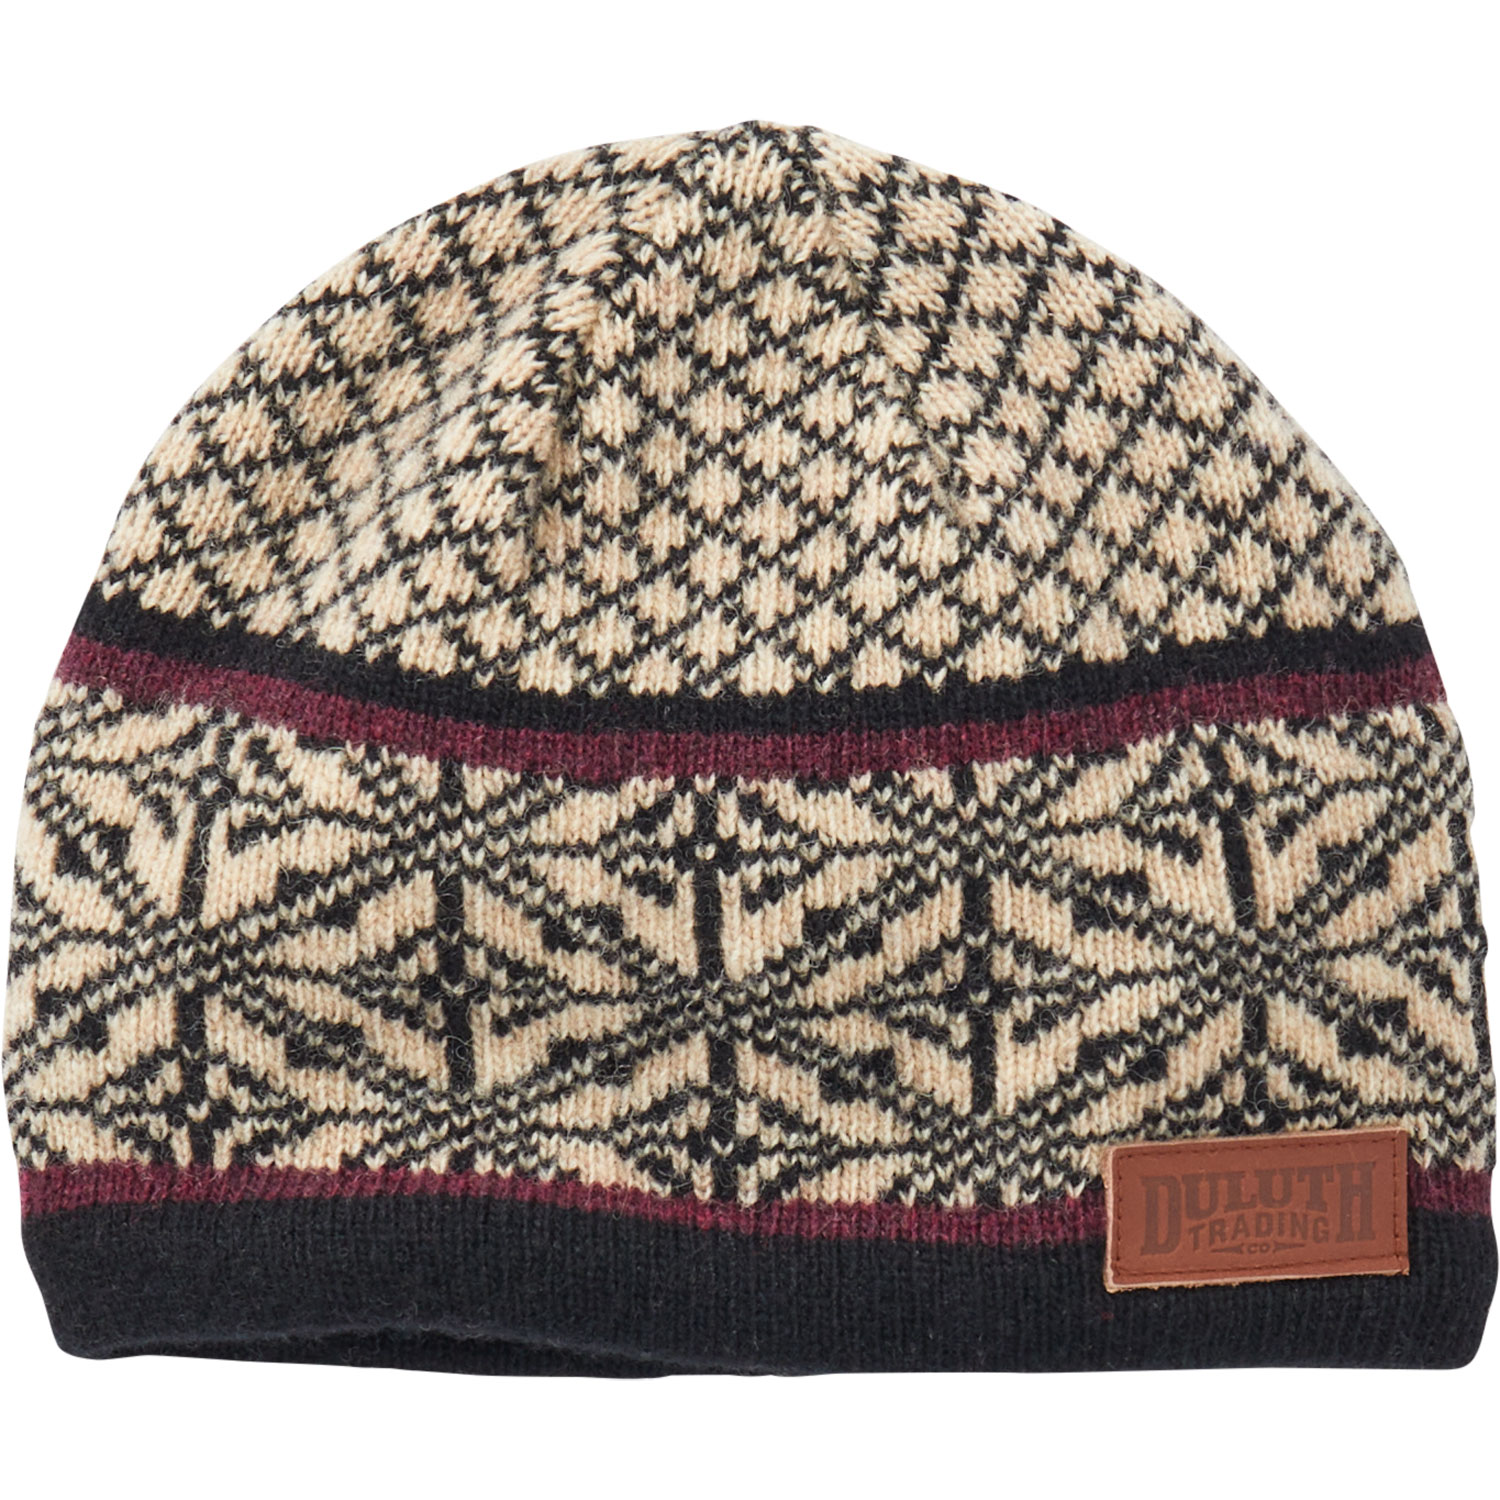 Duluth Trading Co. Men's Woolly Mammoth Hat